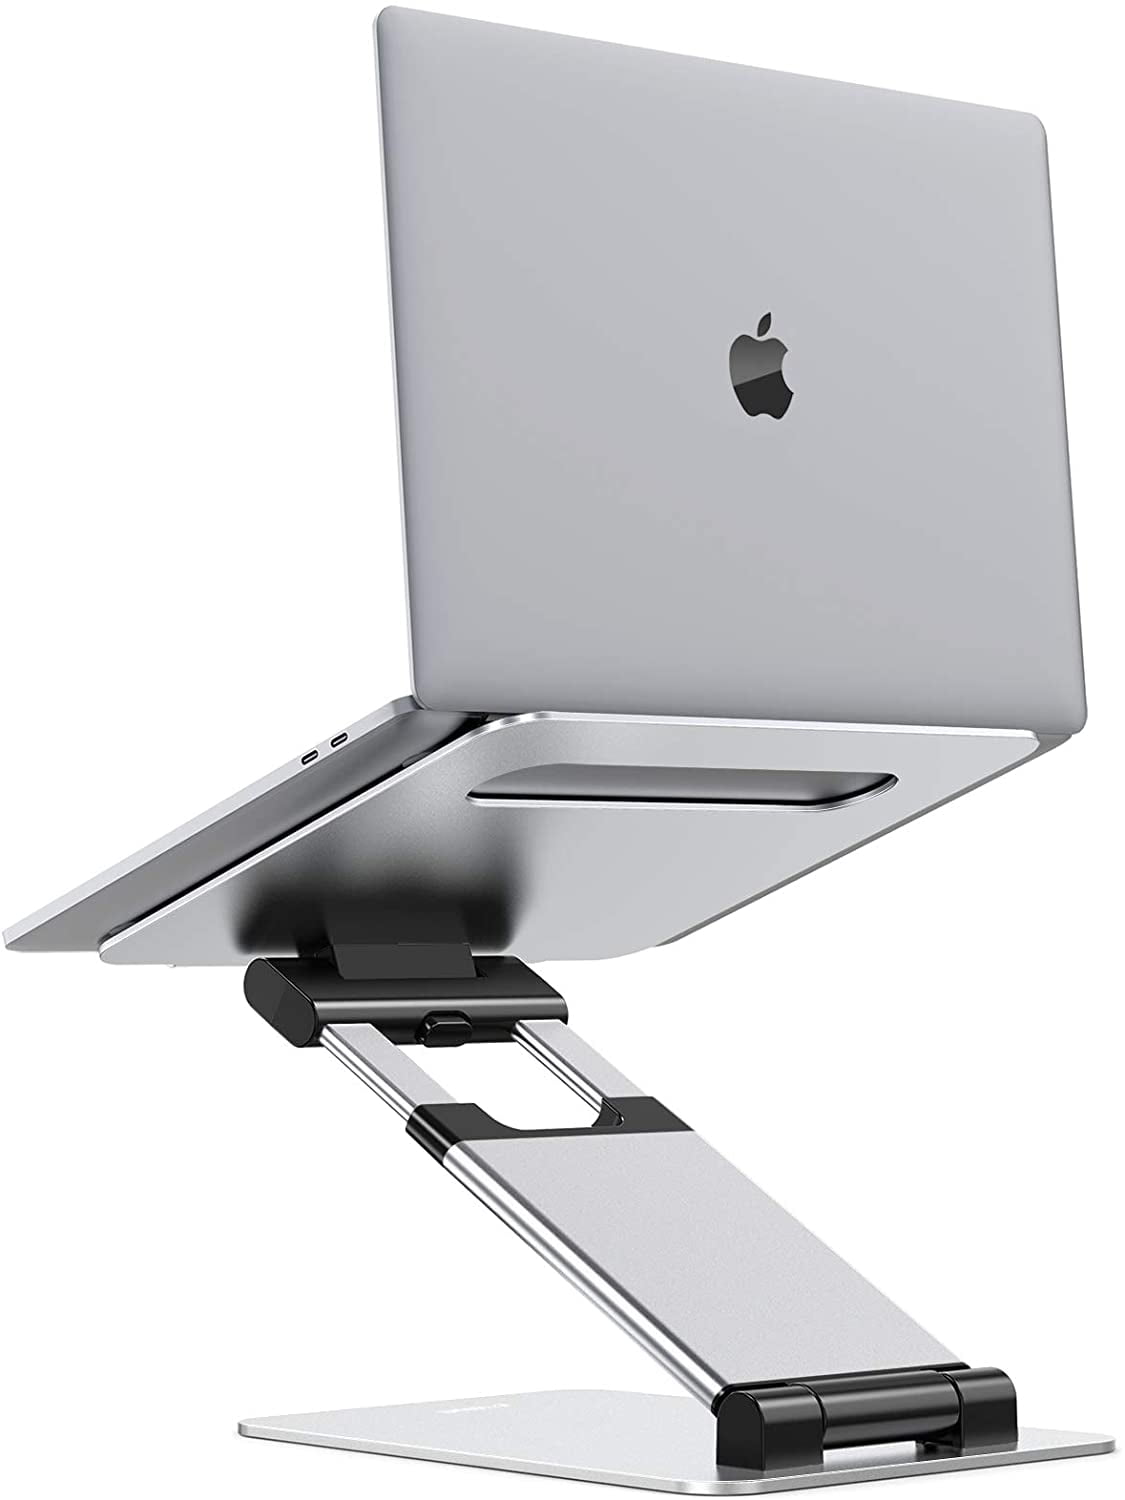 Black Laptop Stand Ergonomic Height Angle Adjustable Computer Laptop Holder Compatible withAll Laptops 11-17 